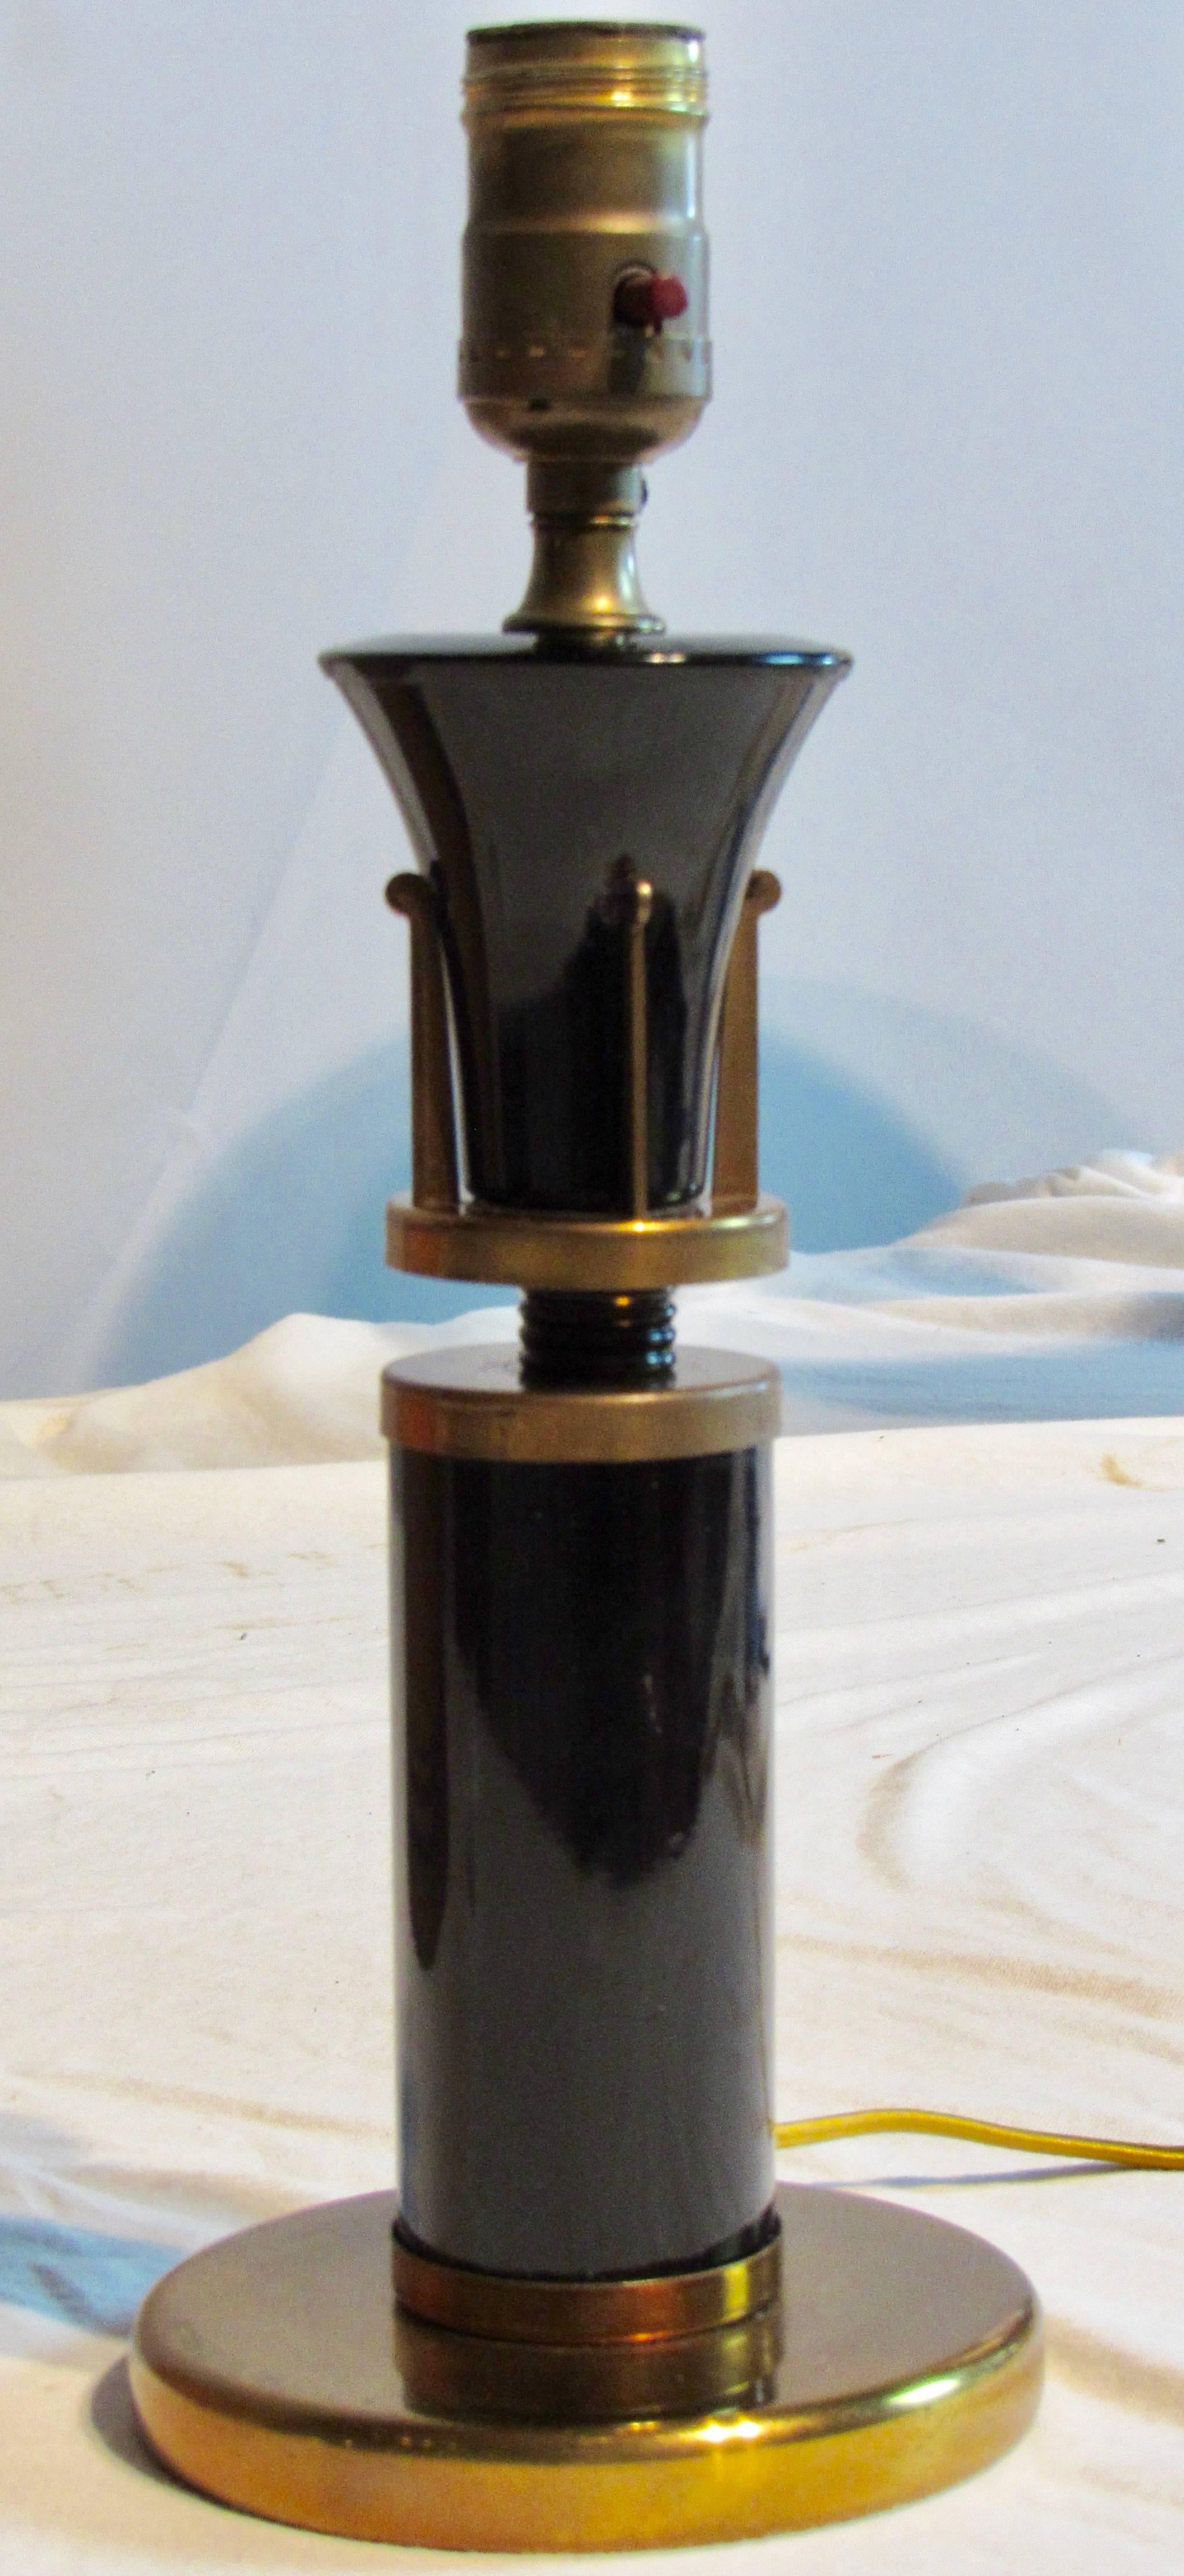 American Art Deco table lamp with gold washed metal and plasticine or another bakelite like coated body. 
The original printed paper shade is in excellent condition. 
The shade has a threaded harp support that screws onto the socket. There is an